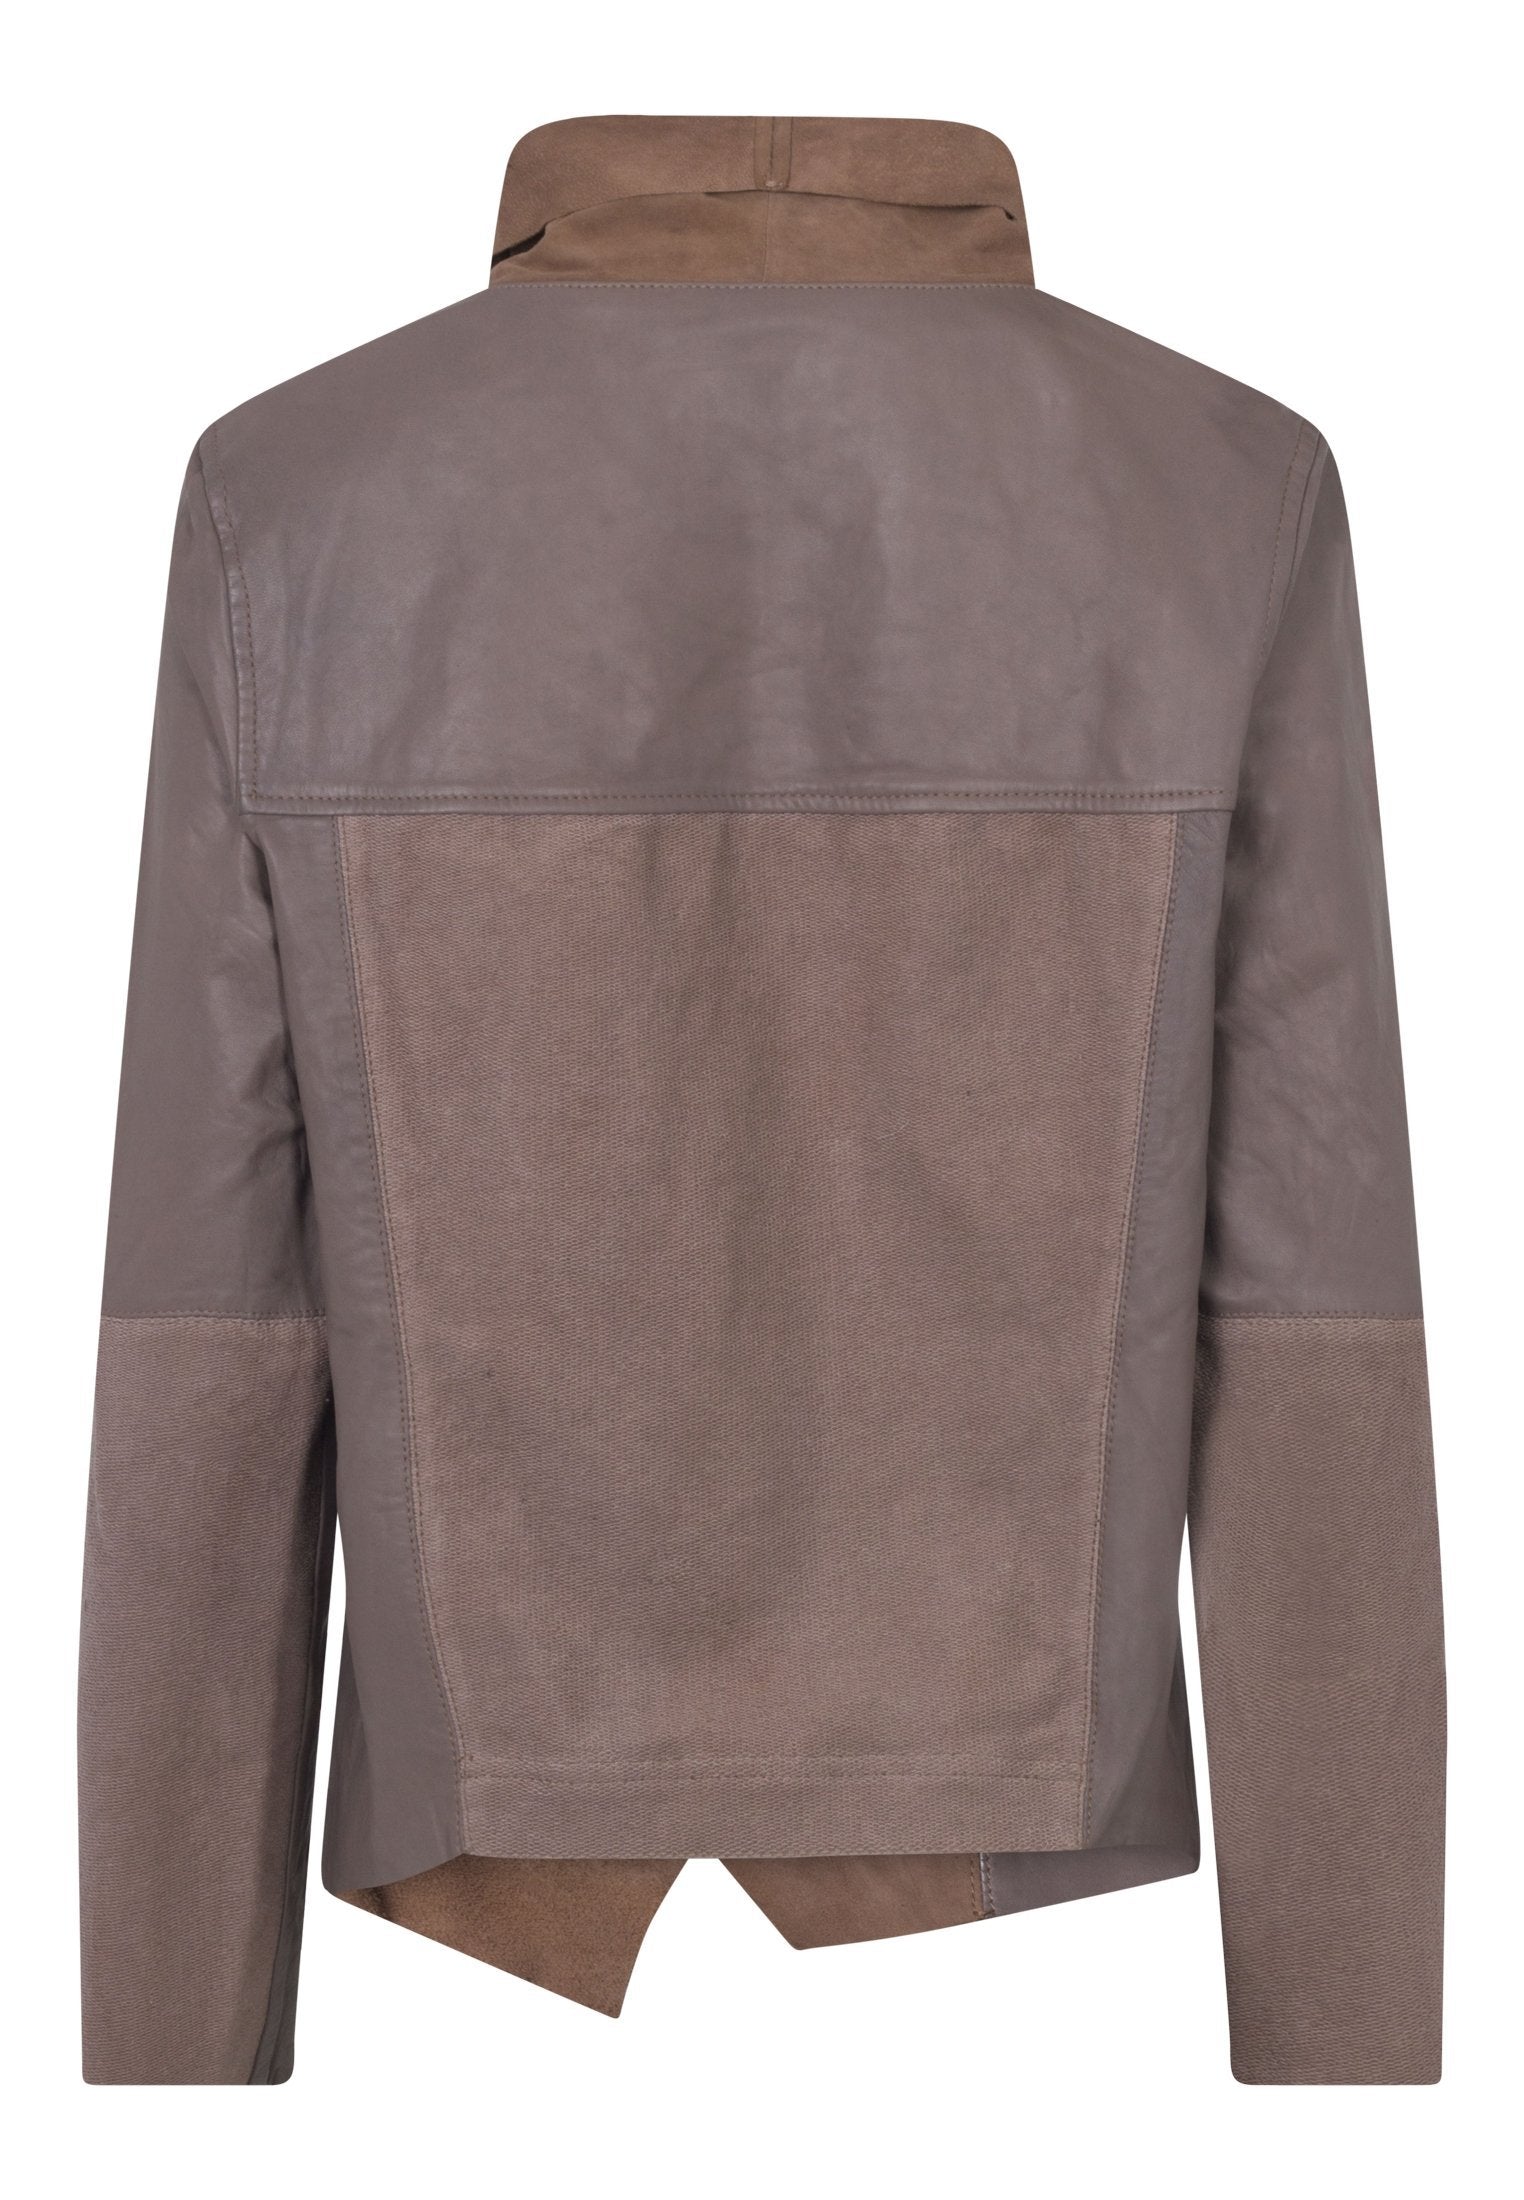 RELIGION Publicised Leather Jacket Taupe